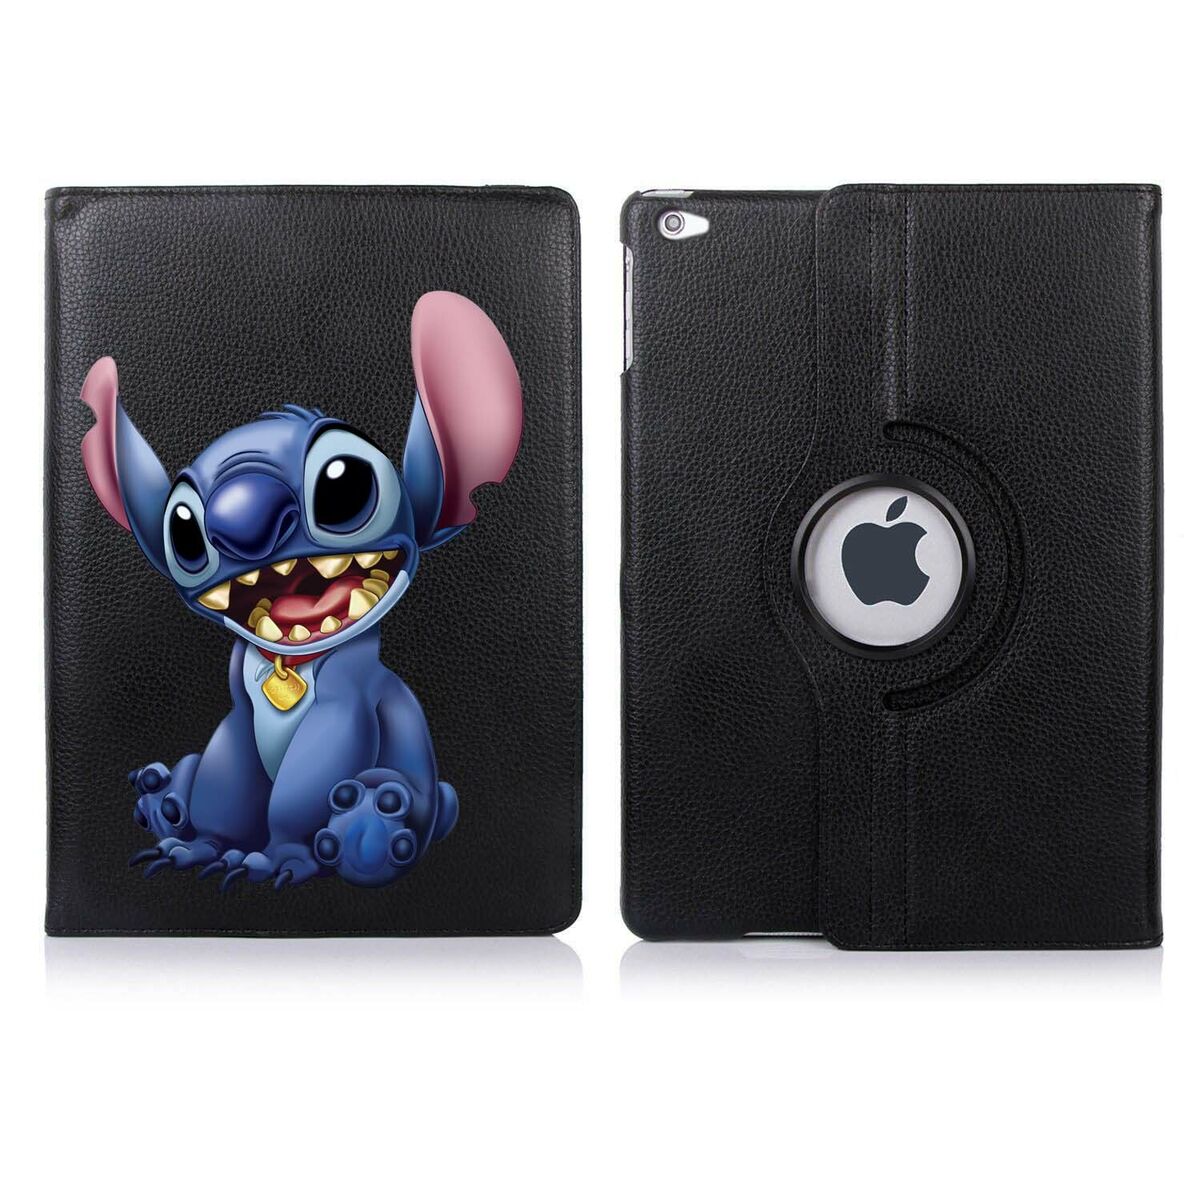 Stitch Personalised 360 Rotating Case Cover for ALL Apple iPad